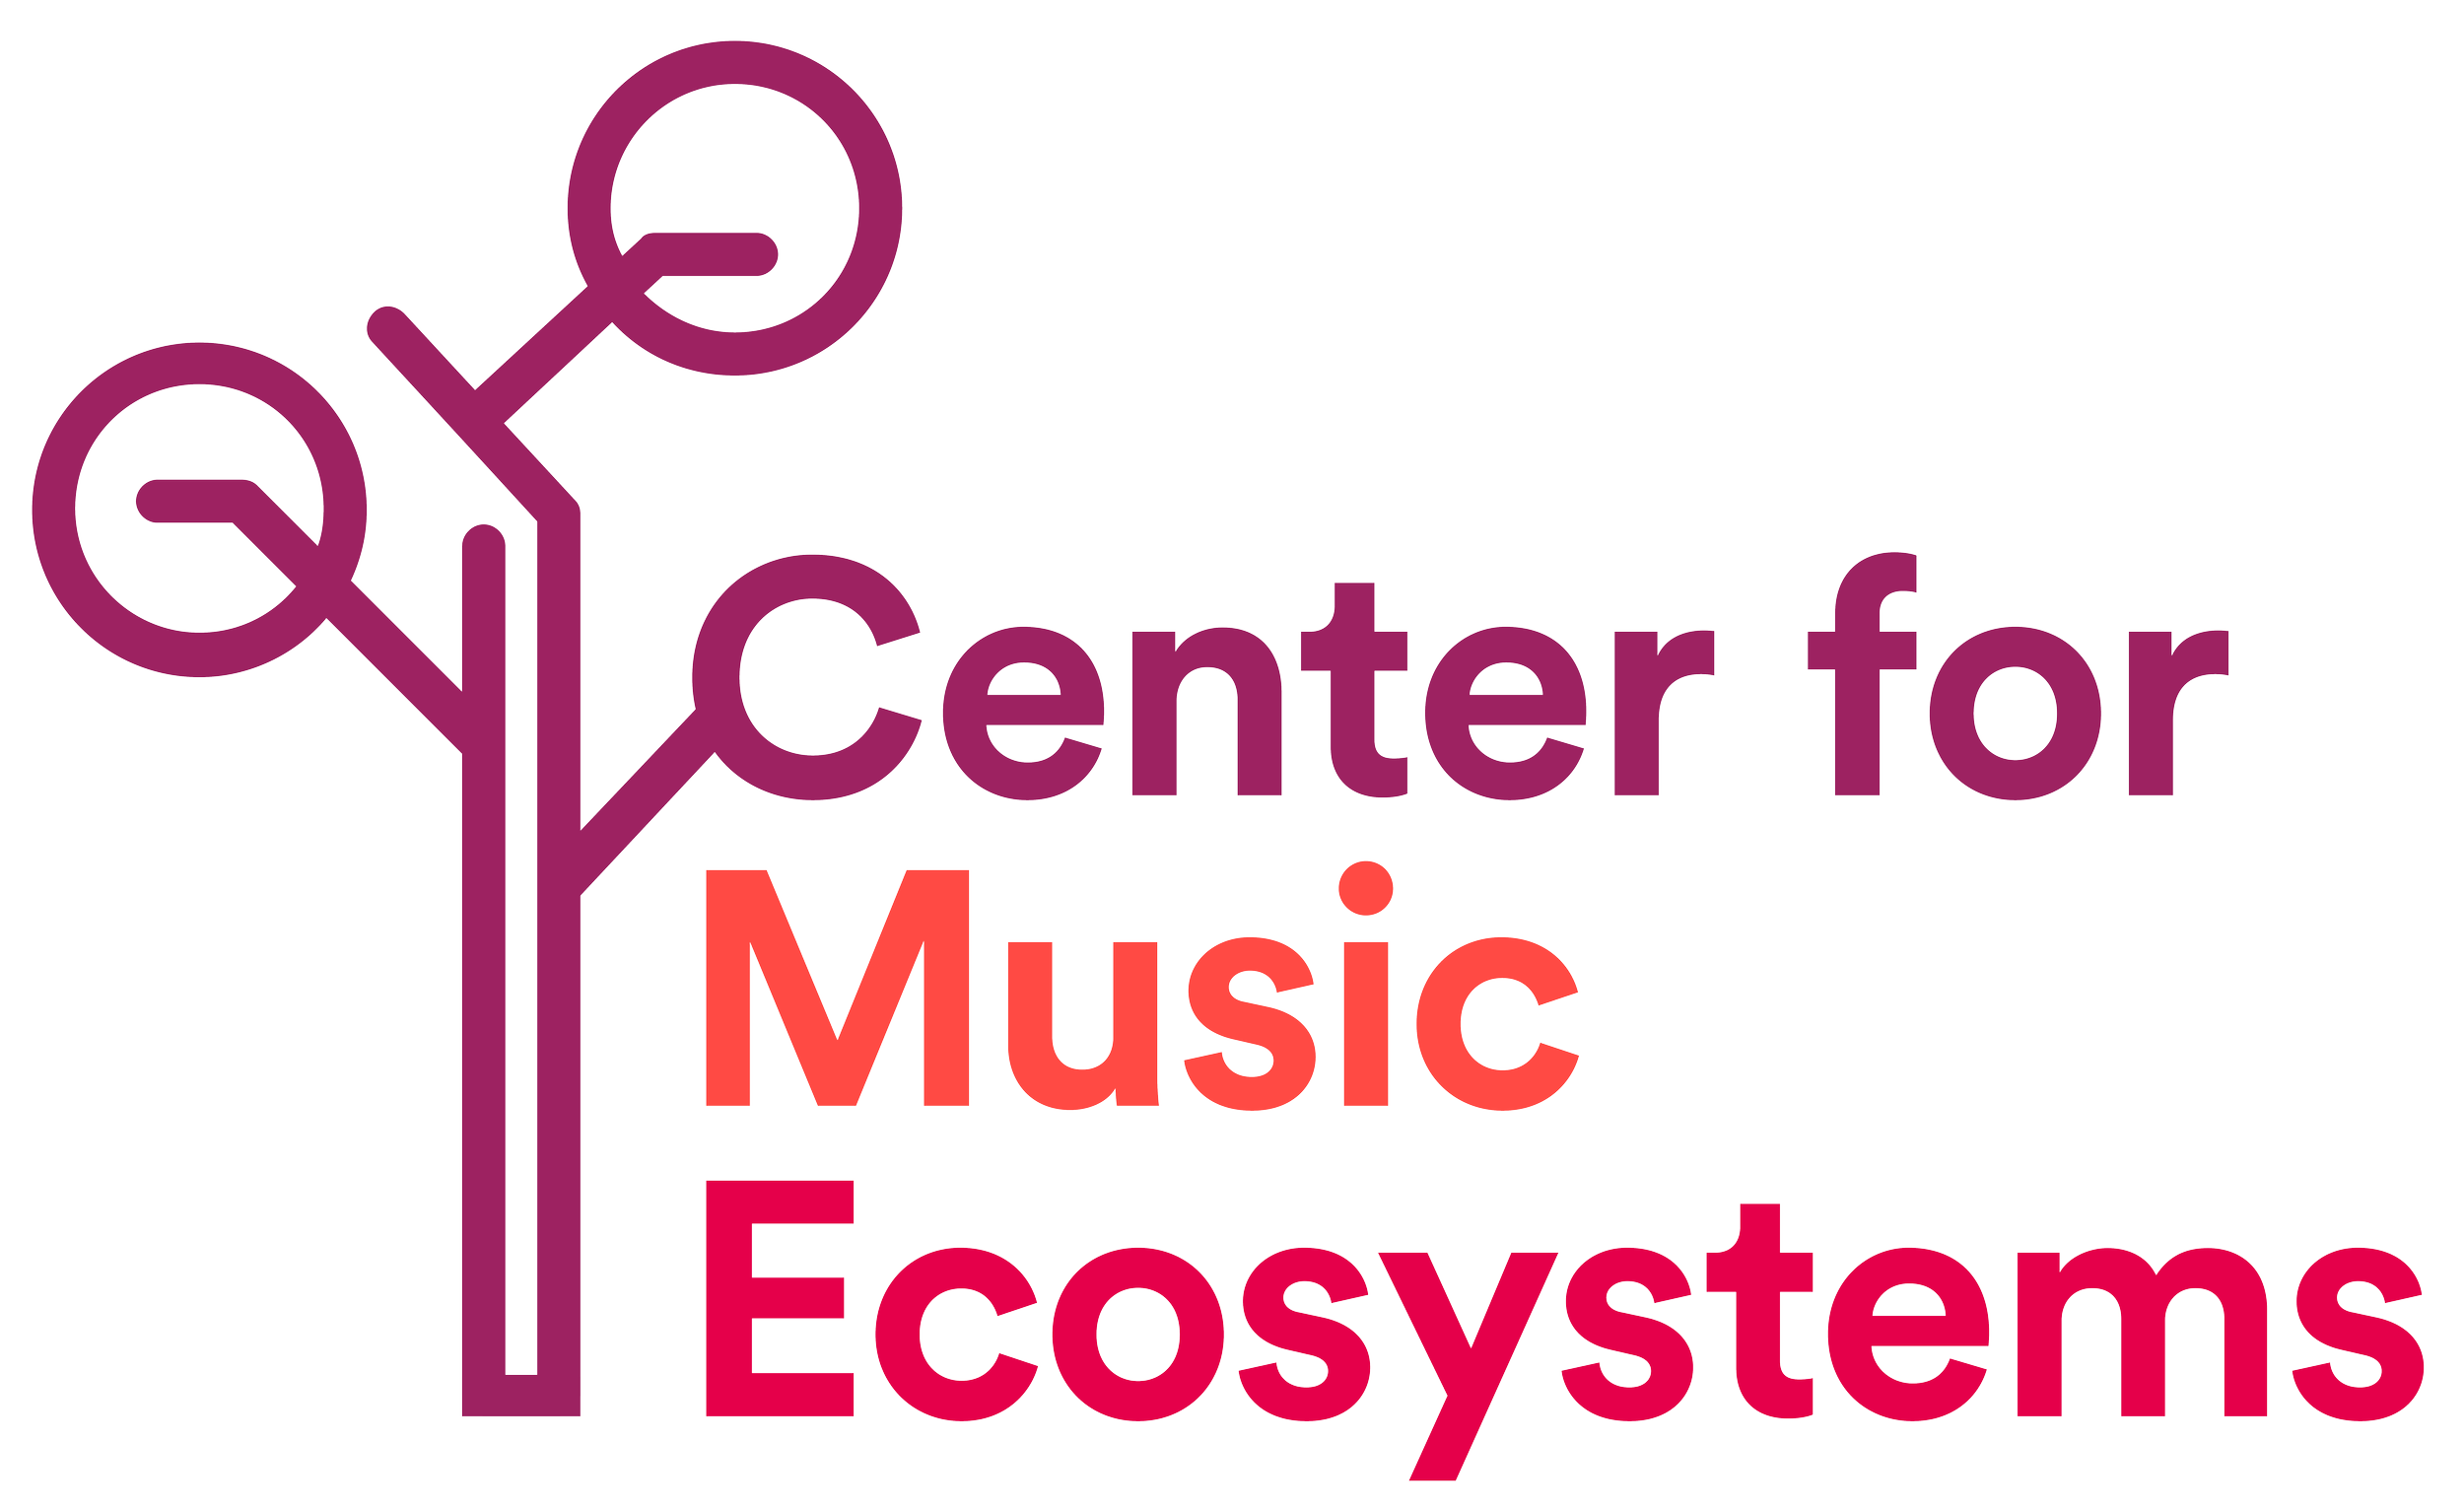 891 CENTER FOR MUSIC ECOSYSTEMS Logo_V1_large.png